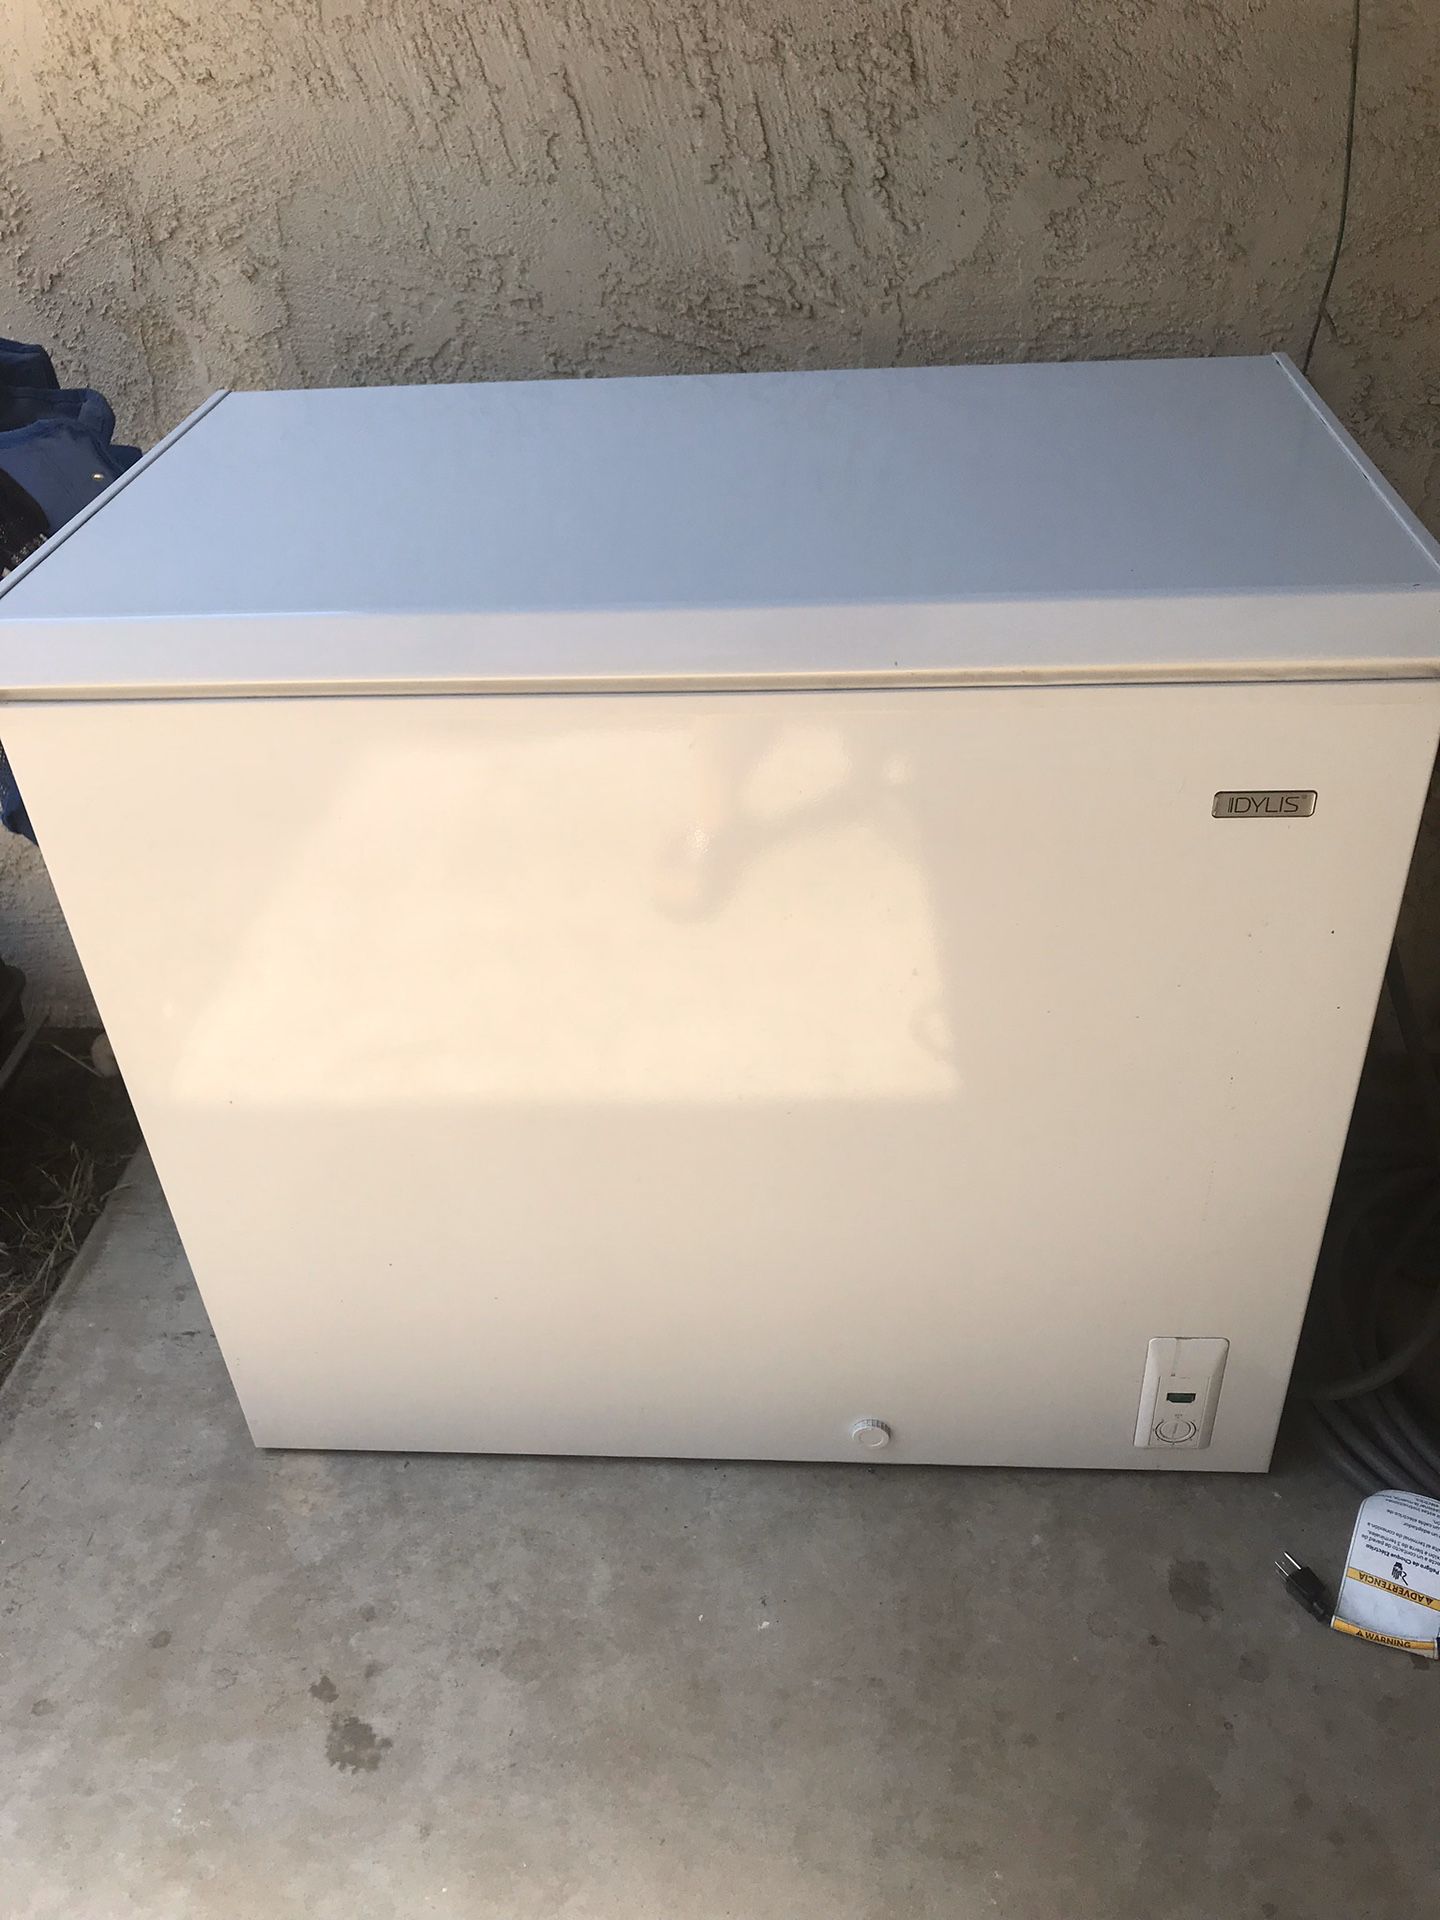 Idylis 7.1 cu ft deep freezer. Never used. 3 months old